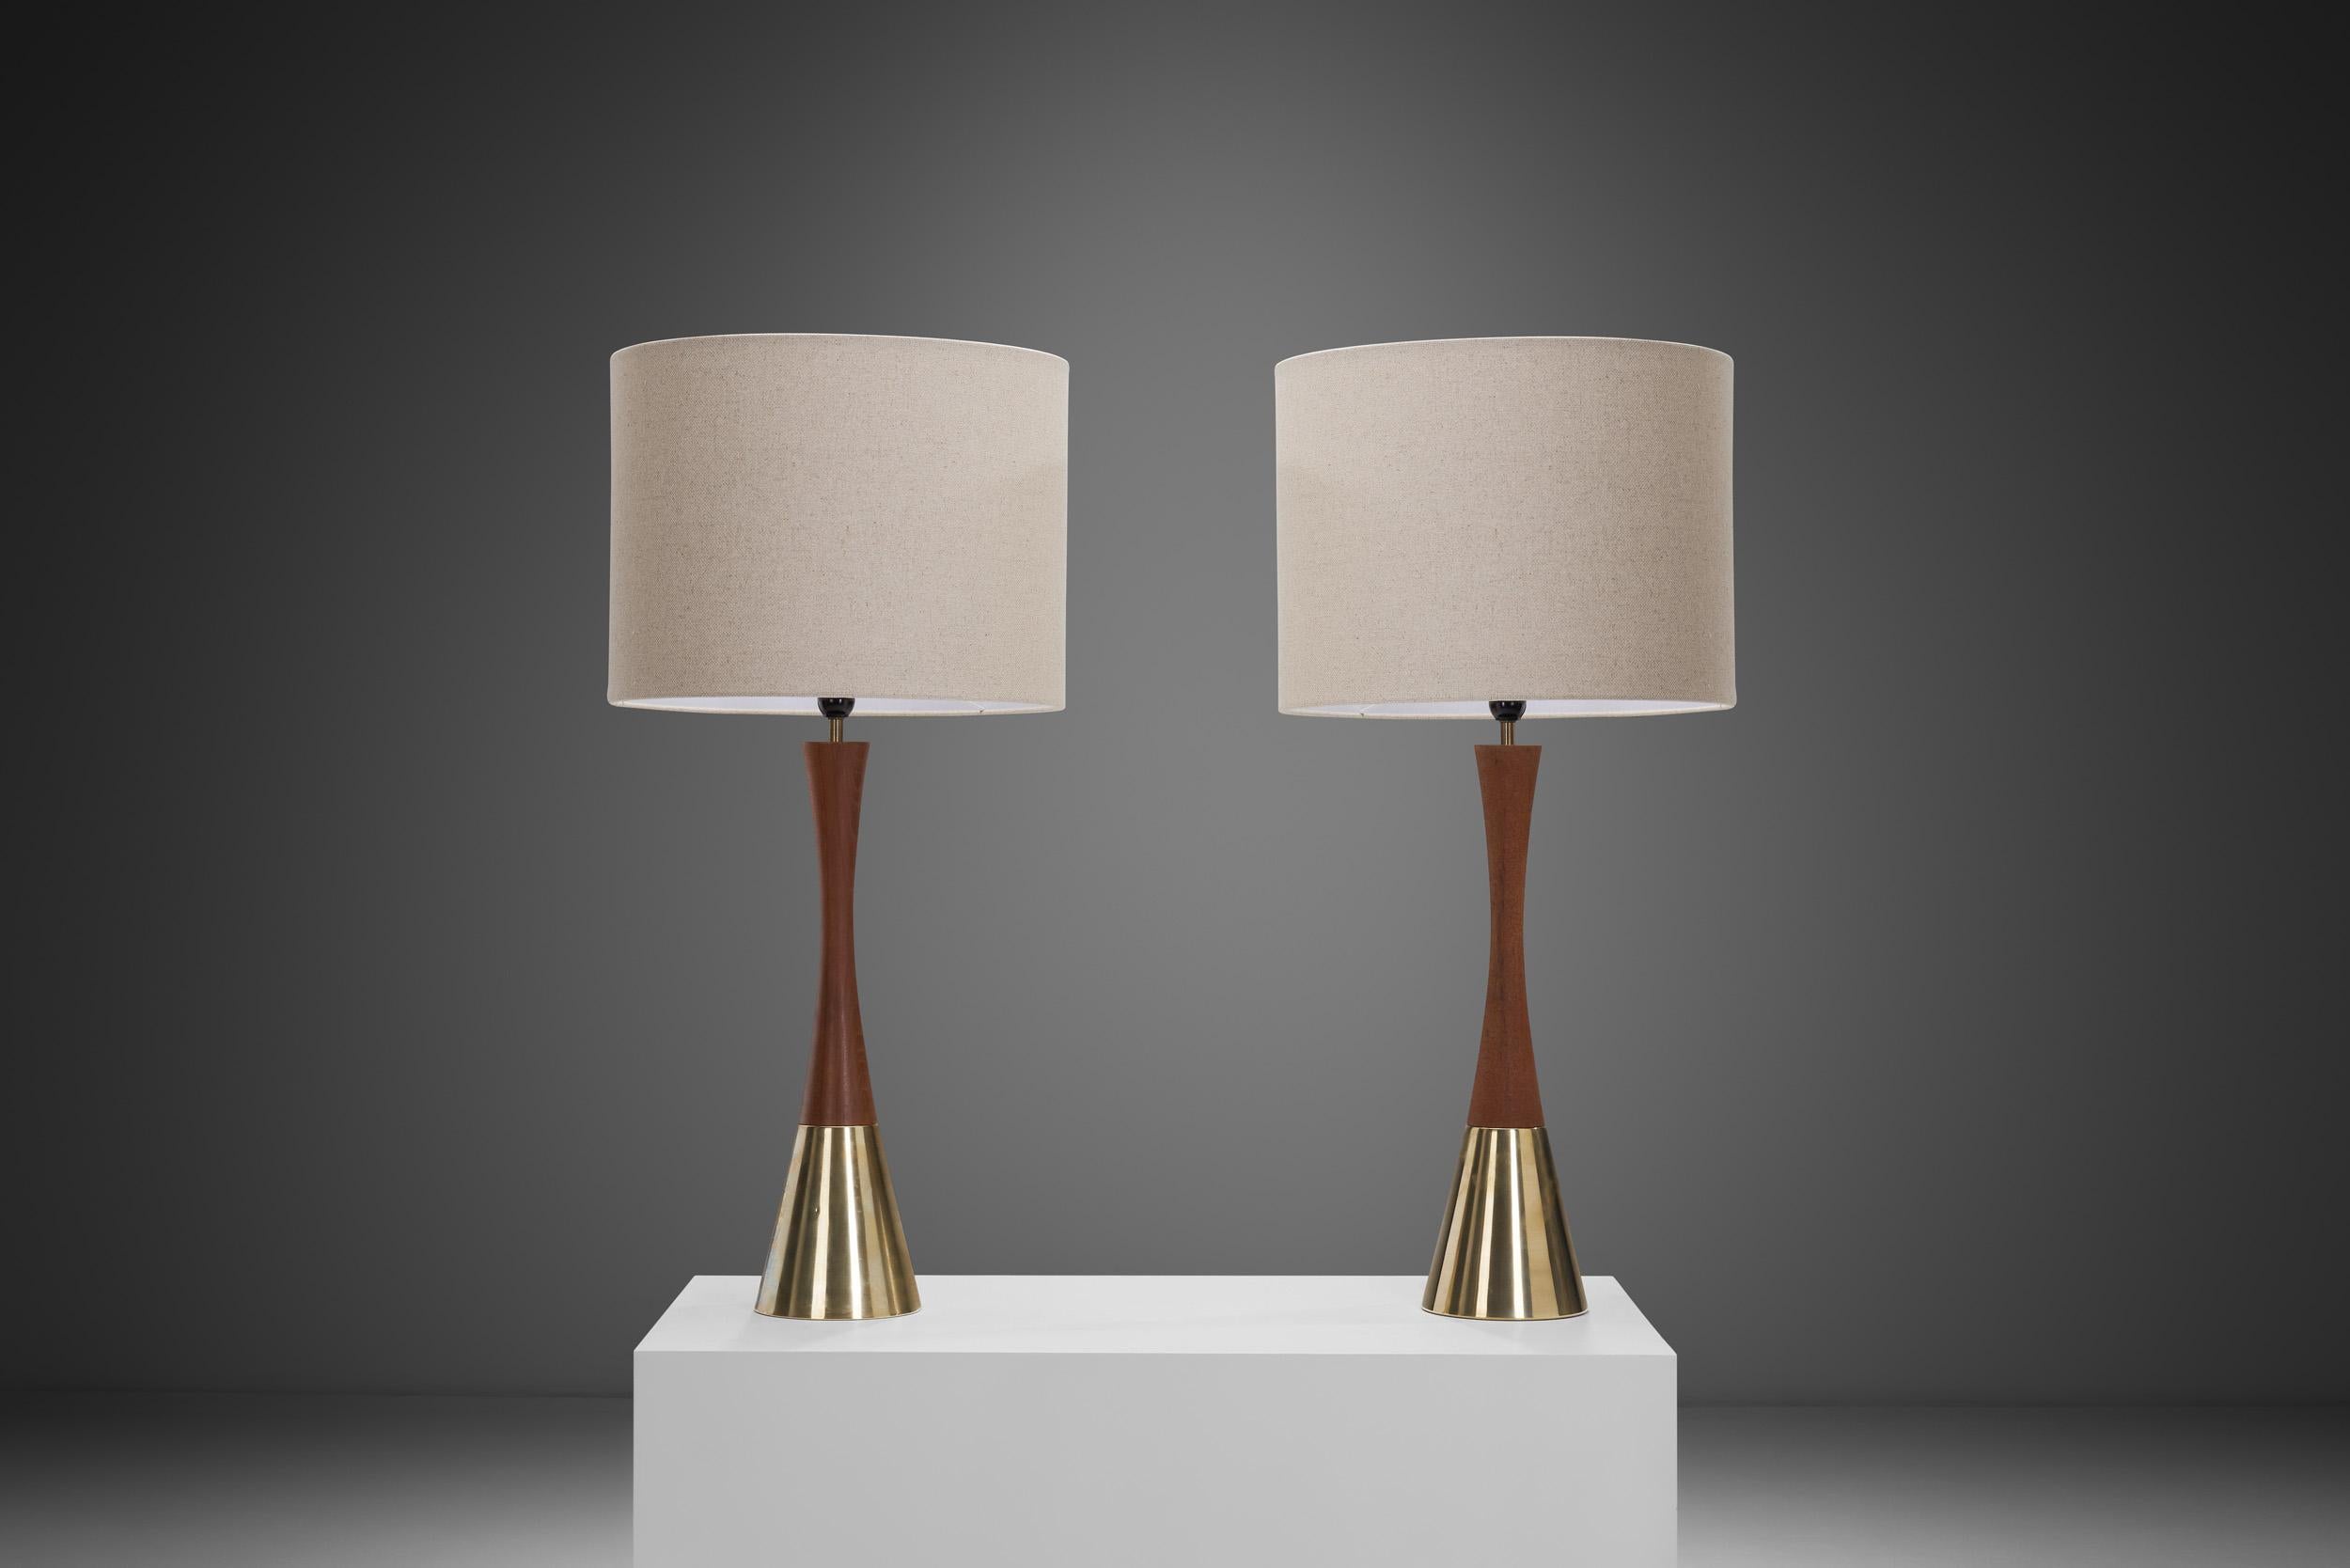 Mid-Century Modern Pair of Teak and Brass Table Lamps by Bergboms, Sweden ca 1970s For Sale